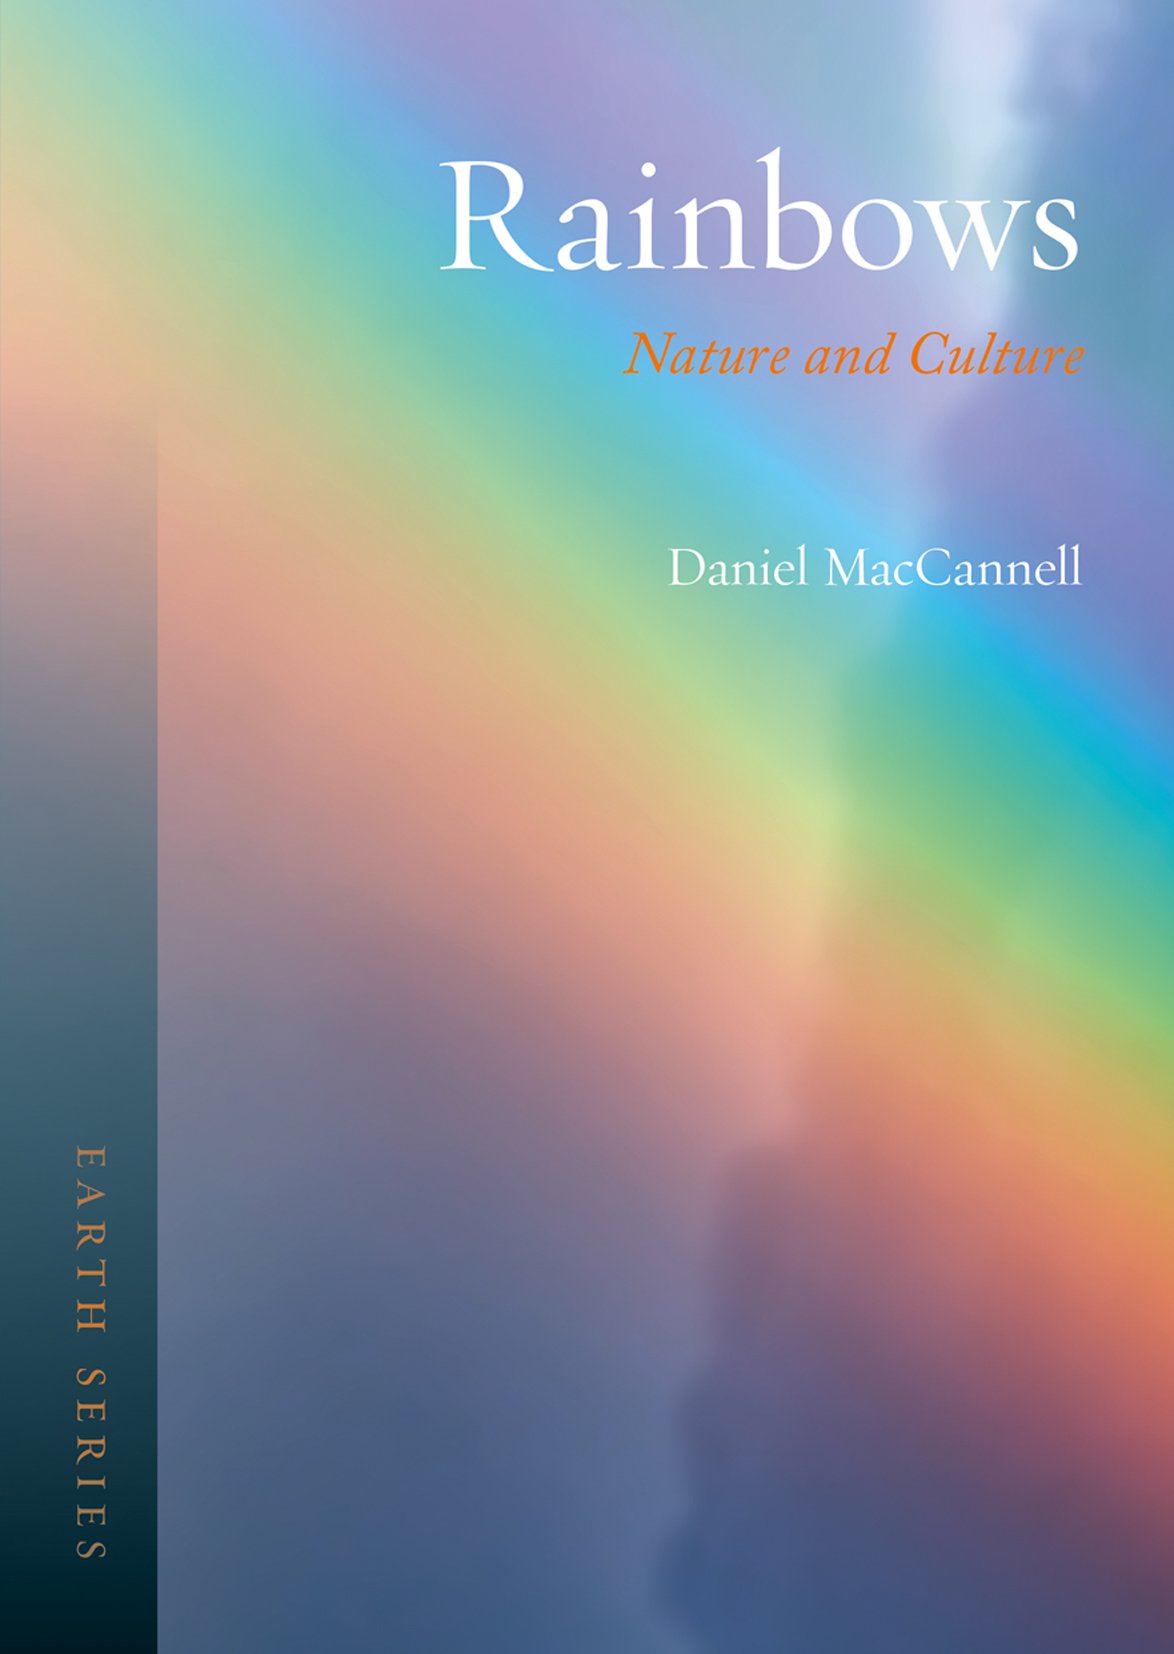 Download Rainbows: Nature and Culture (Earth) - SoftArchive